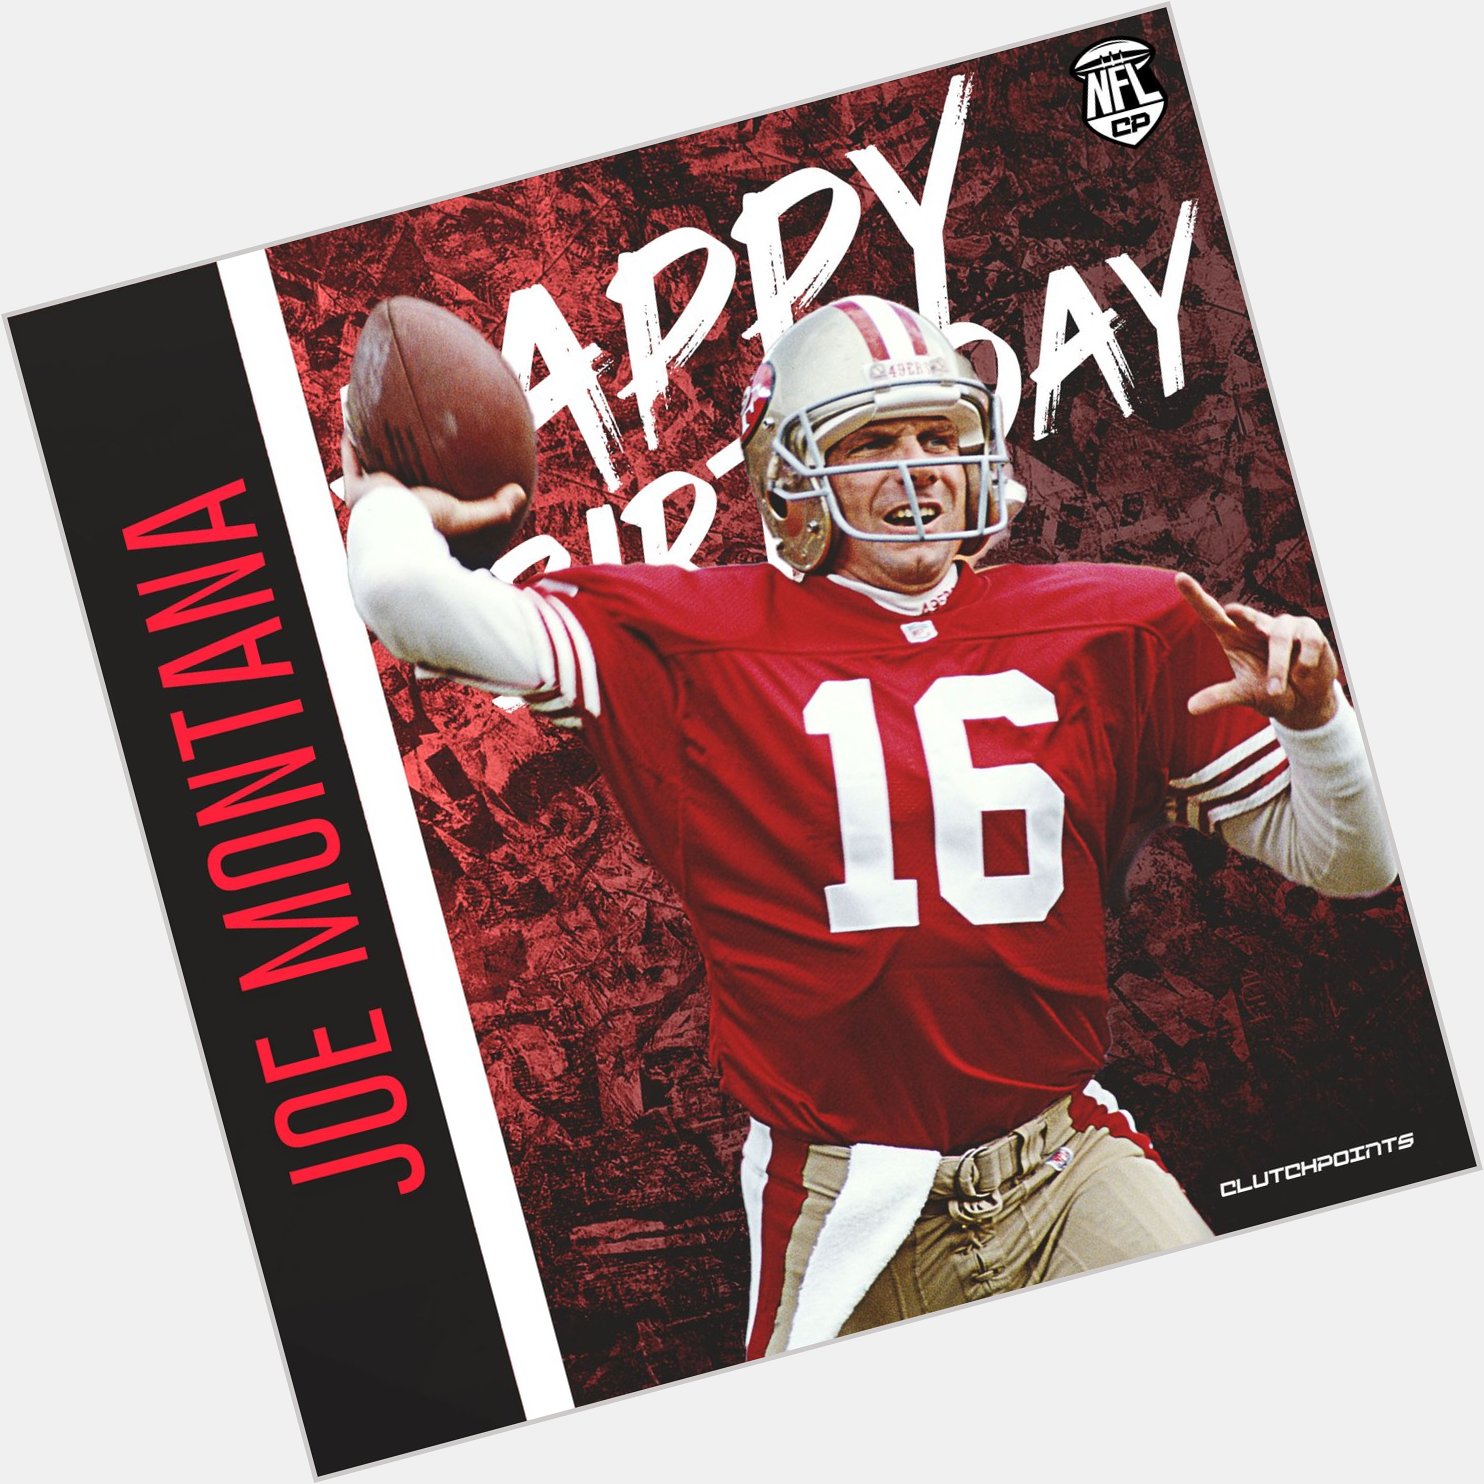 NFL fans, let\s all greet one of the GOAT QBs in Joe Montana a happy birthday!  